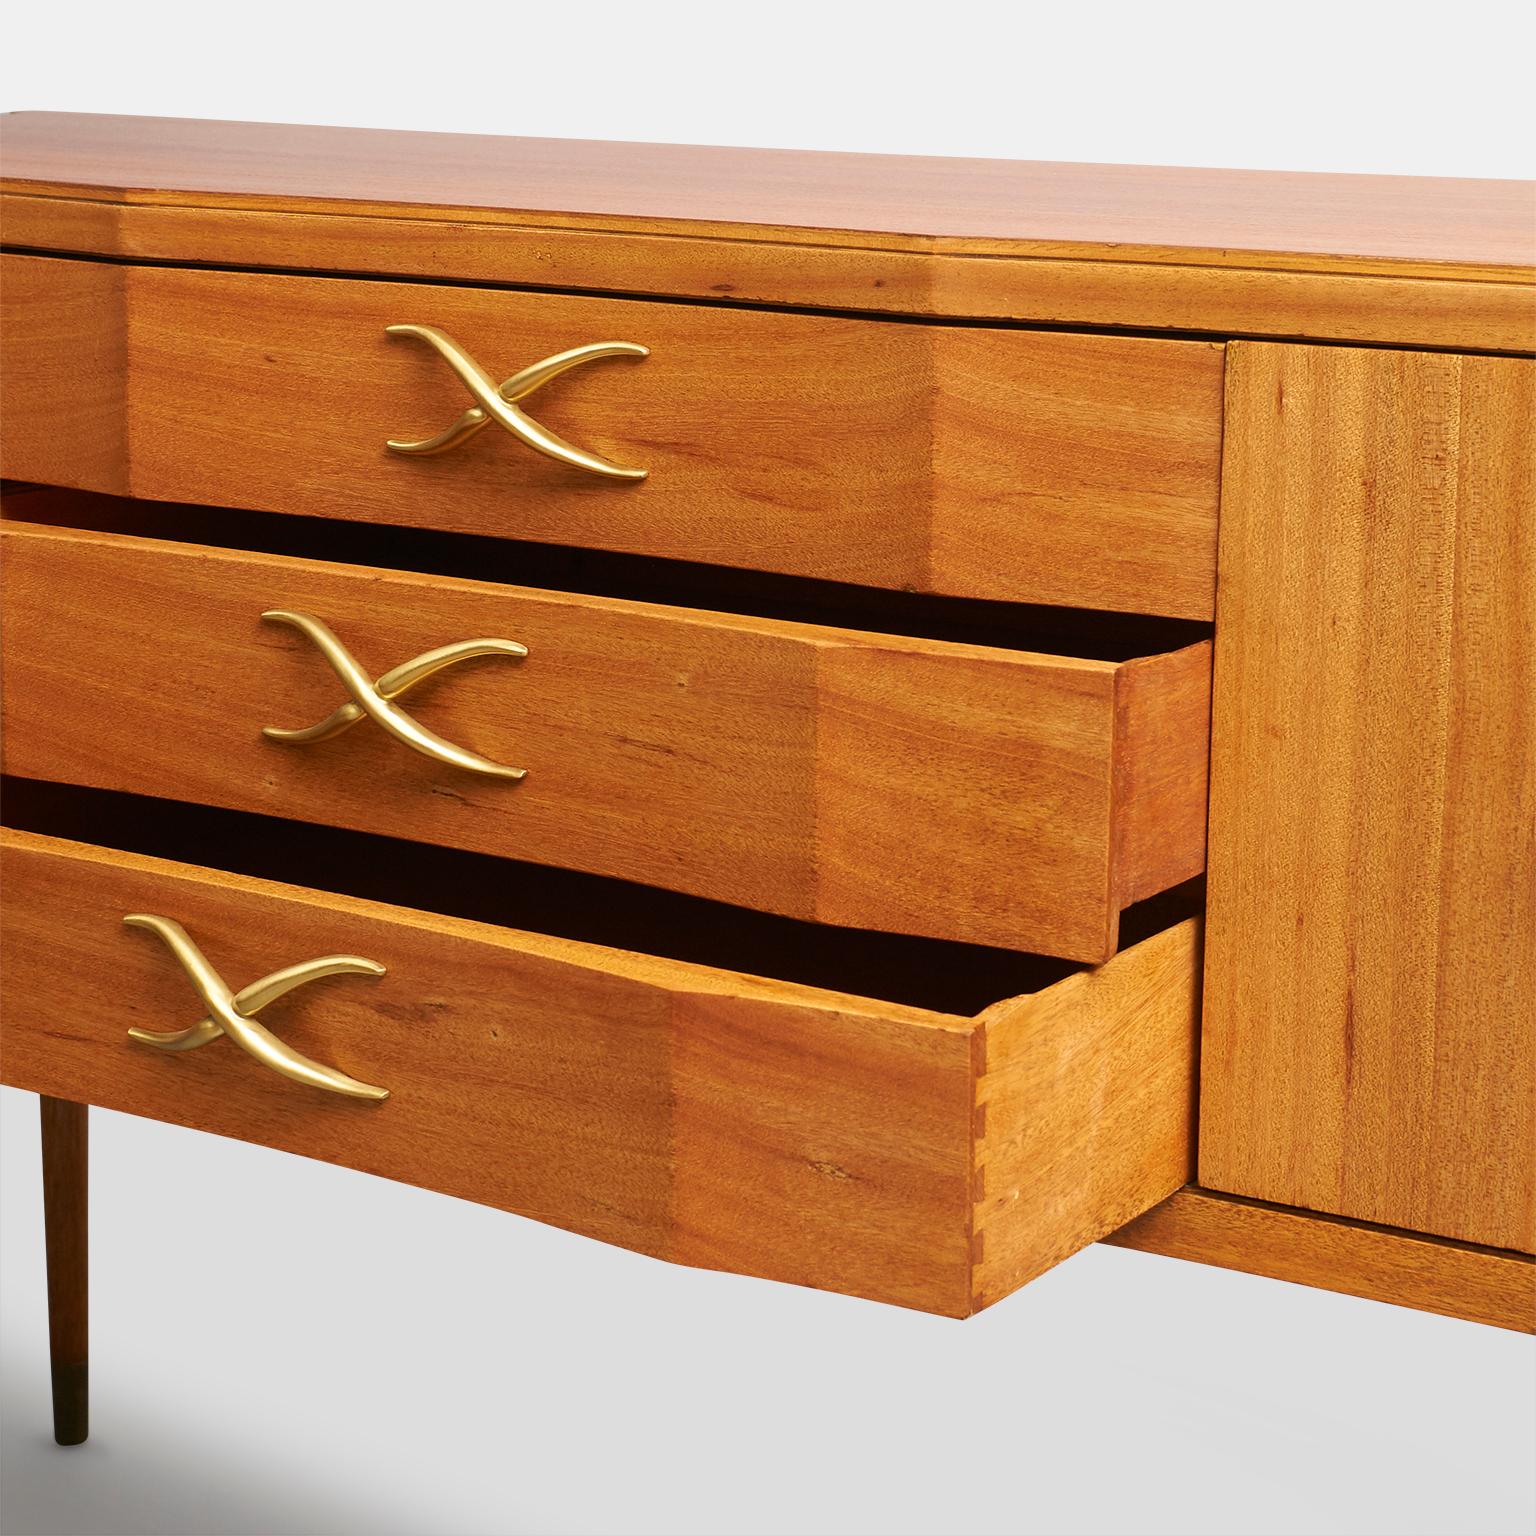 A sideboard or buffet by Paul Frankl in bleached mahogany with Brass “X” from handles on the three drawers and brass ring pulls on the two doors.